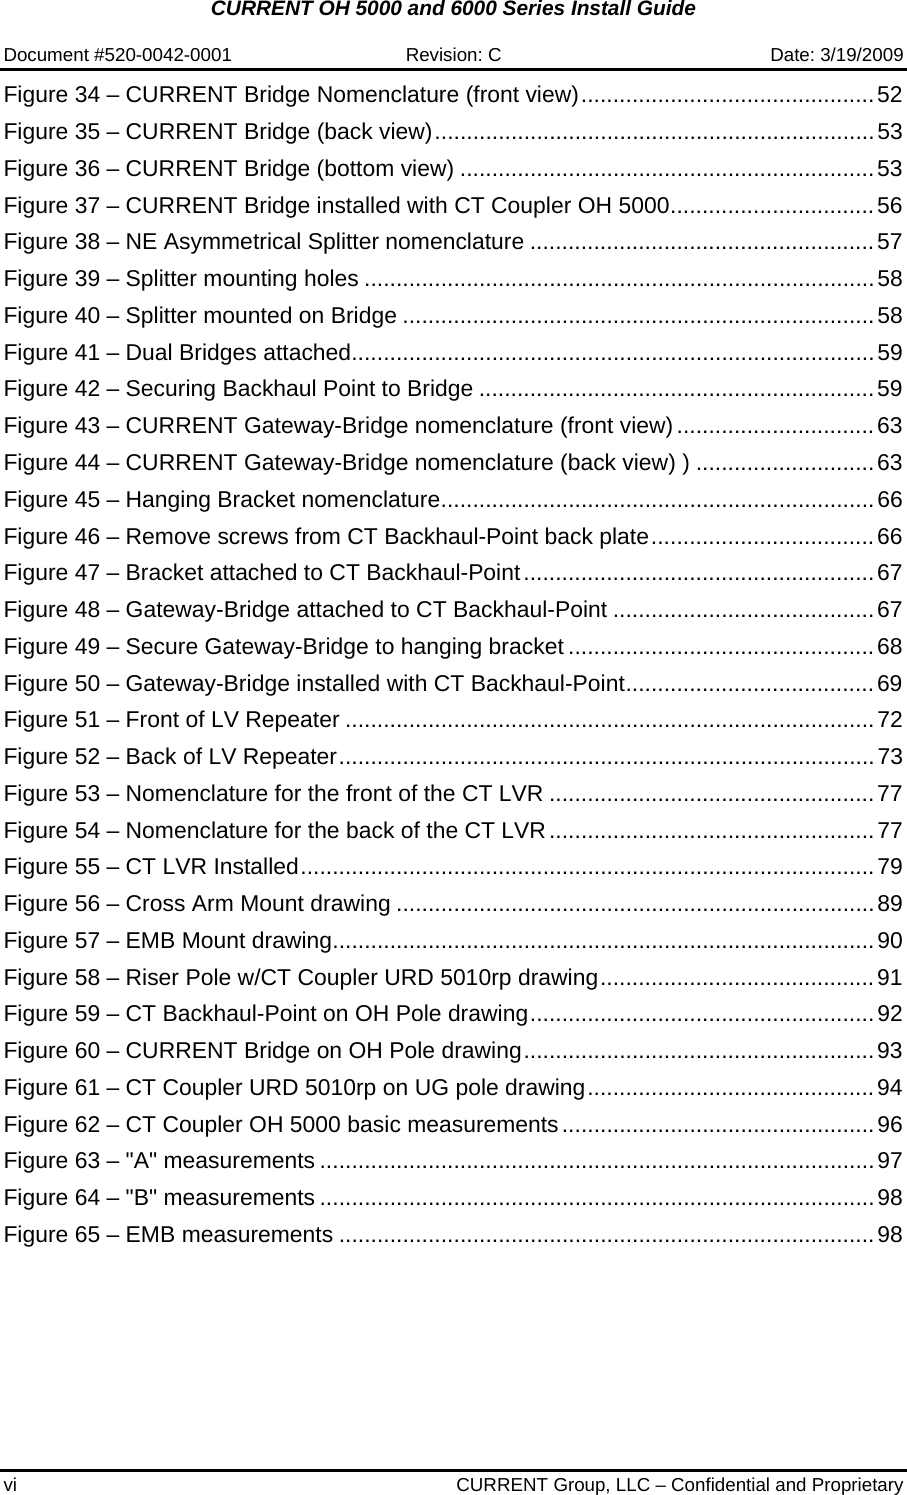 CURRENT OH 5000 and 6000 Series Install Guide  Document #520-0042-0001  Revision: C  Date: 3/19/2009 vi  CURRENT Group, LLC – Confidential and Proprietary Figure 34 – CURRENT Bridge Nomenclature (front view)..............................................52 Figure 35 – CURRENT Bridge (back view).....................................................................53 Figure 36 – CURRENT Bridge (bottom view) .................................................................53 Figure 37 – CURRENT Bridge installed with CT Coupler OH 5000................................56 Figure 38 – NE Asymmetrical Splitter nomenclature ......................................................57 Figure 39 – Splitter mounting holes ................................................................................58 Figure 40 – Splitter mounted on Bridge ..........................................................................58 Figure 41 – Dual Bridges attached..................................................................................59 Figure 42 – Securing Backhaul Point to Bridge ..............................................................59 Figure 43 – CURRENT Gateway-Bridge nomenclature (front view)...............................63 Figure 44 – CURRENT Gateway-Bridge nomenclature (back view) ) ............................63 Figure 45 – Hanging Bracket nomenclature....................................................................66 Figure 46 – Remove screws from CT Backhaul-Point back plate...................................66 Figure 47 – Bracket attached to CT Backhaul-Point.......................................................67 Figure 48 – Gateway-Bridge attached to CT Backhaul-Point .........................................67 Figure 49 – Secure Gateway-Bridge to hanging bracket ................................................68 Figure 50 – Gateway-Bridge installed with CT Backhaul-Point.......................................69 Figure 51 – Front of LV Repeater ...................................................................................72 Figure 52 – Back of LV Repeater....................................................................................73 Figure 53 – Nomenclature for the front of the CT LVR ...................................................77 Figure 54 – Nomenclature for the back of the CT LVR...................................................77 Figure 55 – CT LVR Installed..........................................................................................79 Figure 56 – Cross Arm Mount drawing ...........................................................................89 Figure 57 – EMB Mount drawing.....................................................................................90 Figure 58 – Riser Pole w/CT Coupler URD 5010rp drawing...........................................91 Figure 59 – CT Backhaul-Point on OH Pole drawing......................................................92 Figure 60 – CURRENT Bridge on OH Pole drawing.......................................................93 Figure 61 – CT Coupler URD 5010rp on UG pole drawing.............................................94 Figure 62 – CT Coupler OH 5000 basic measurements.................................................96 Figure 63 – &quot;A&quot; measurements .......................................................................................97 Figure 64 – &quot;B&quot; measurements .......................................................................................98 Figure 65 – EMB measurements ....................................................................................98   